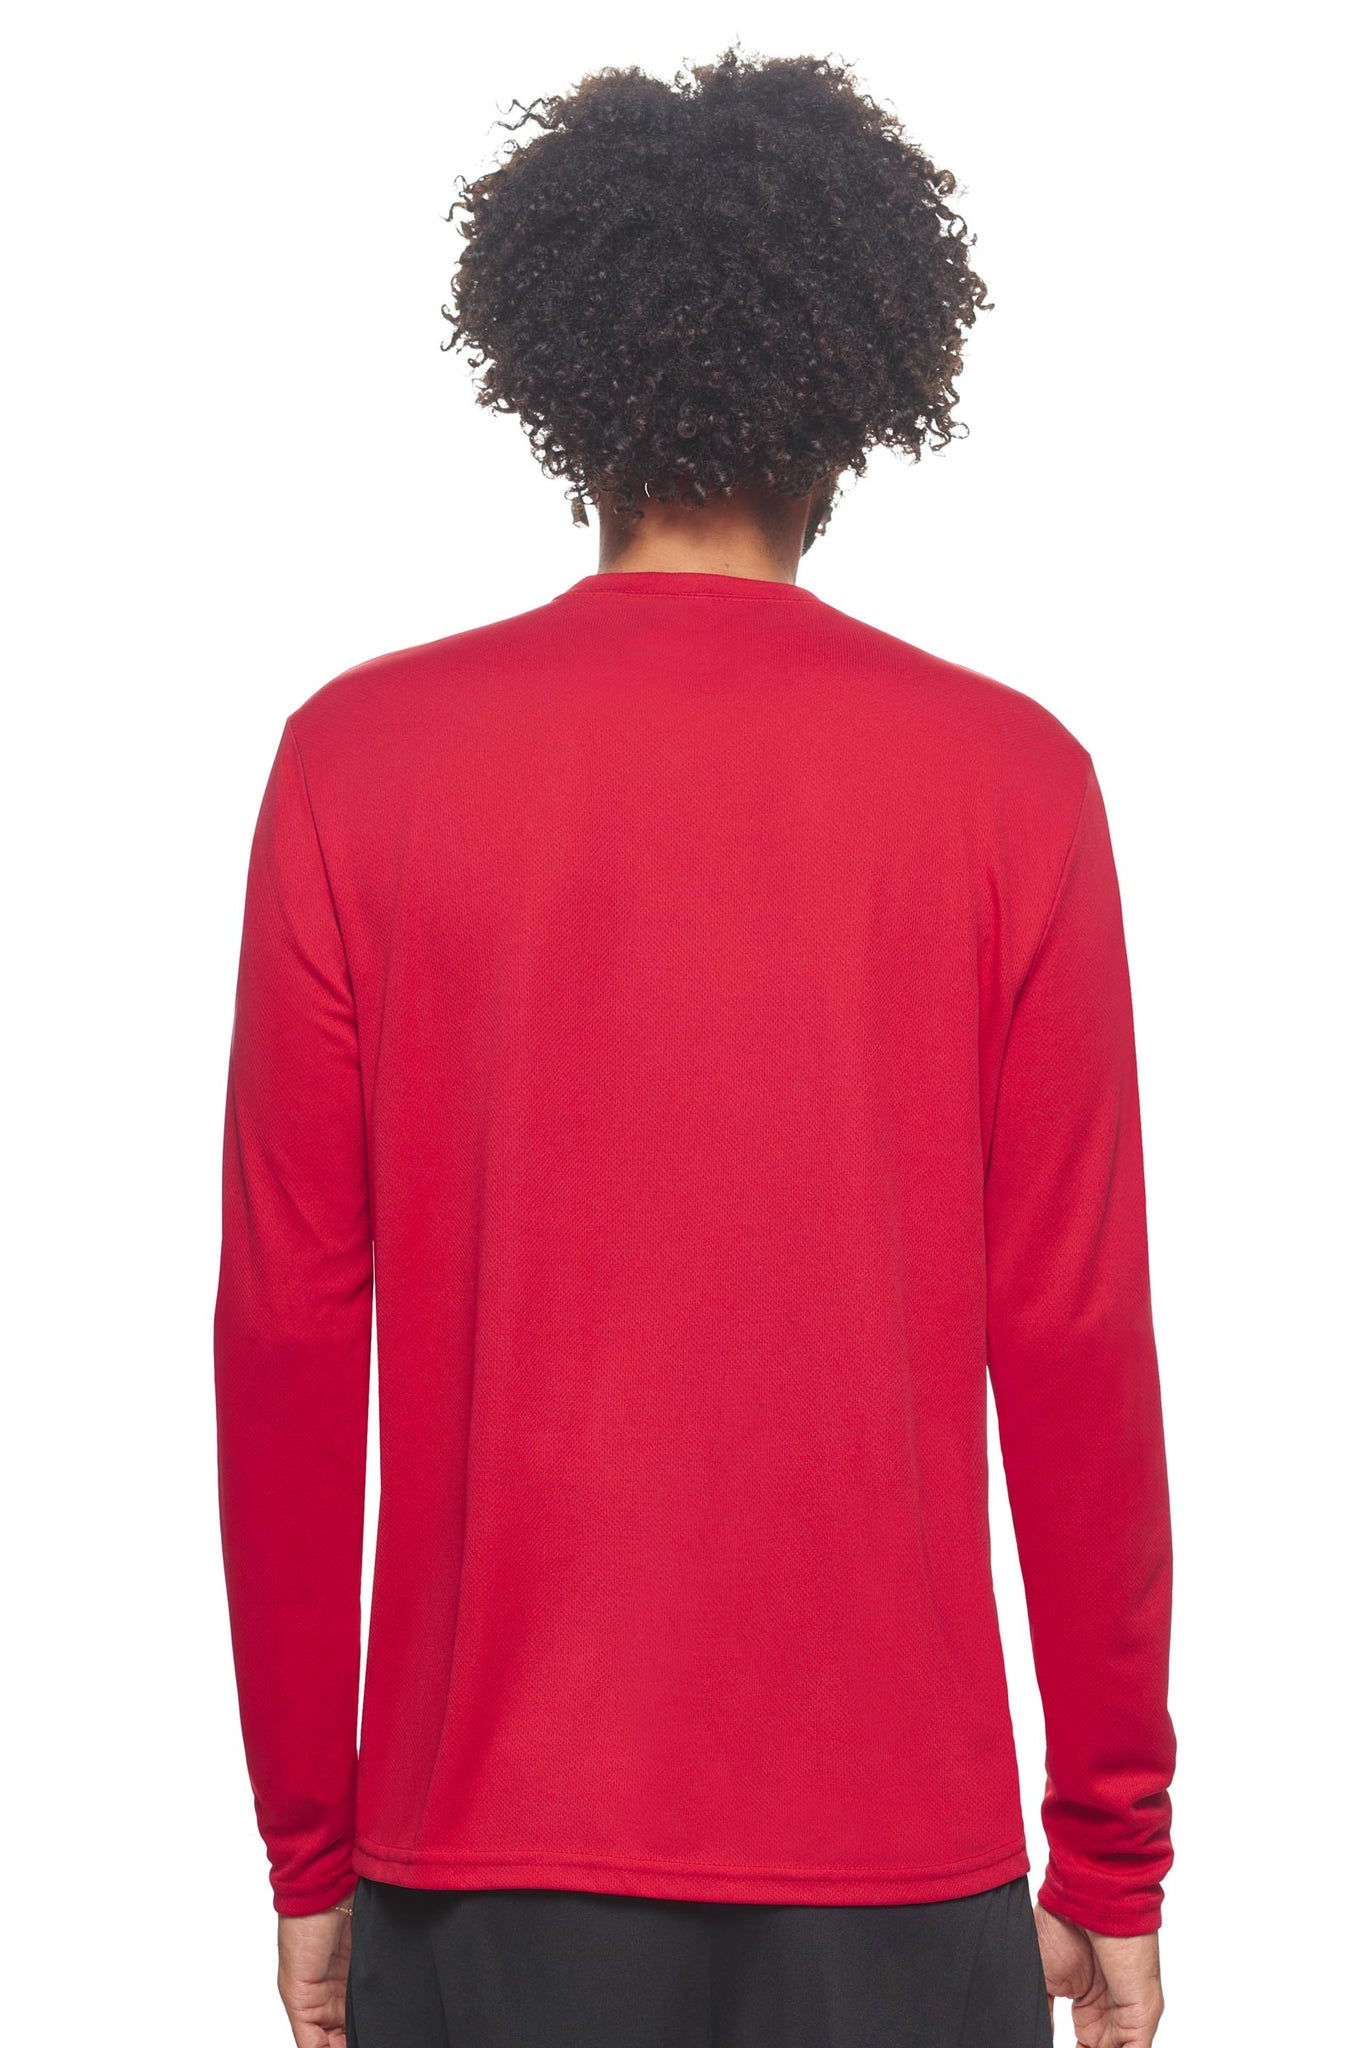 Expert Brand Wholesale Men's Oxymesh Performance Long Sleeve Tec Tee Made in USA AJ901D Red Image 3#true-red